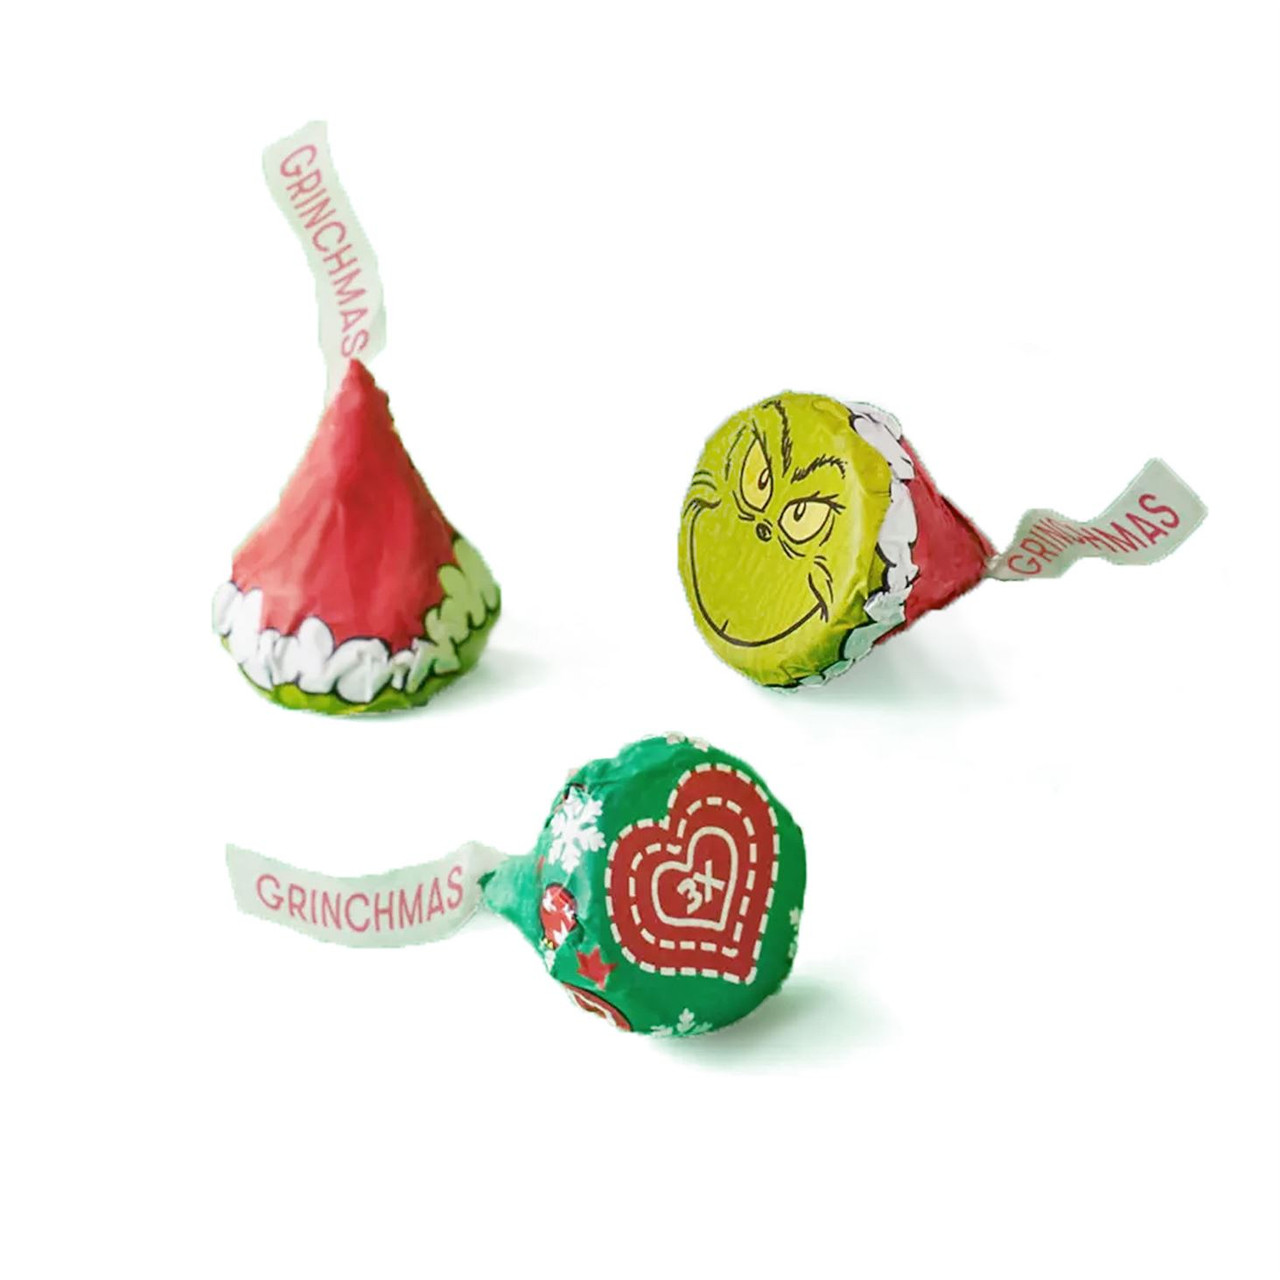  Hershey's Kisses Grinch 2 Lb, Chocolate Treats, Great for  Wedding, Easter, Christmas, Halloween, Movies